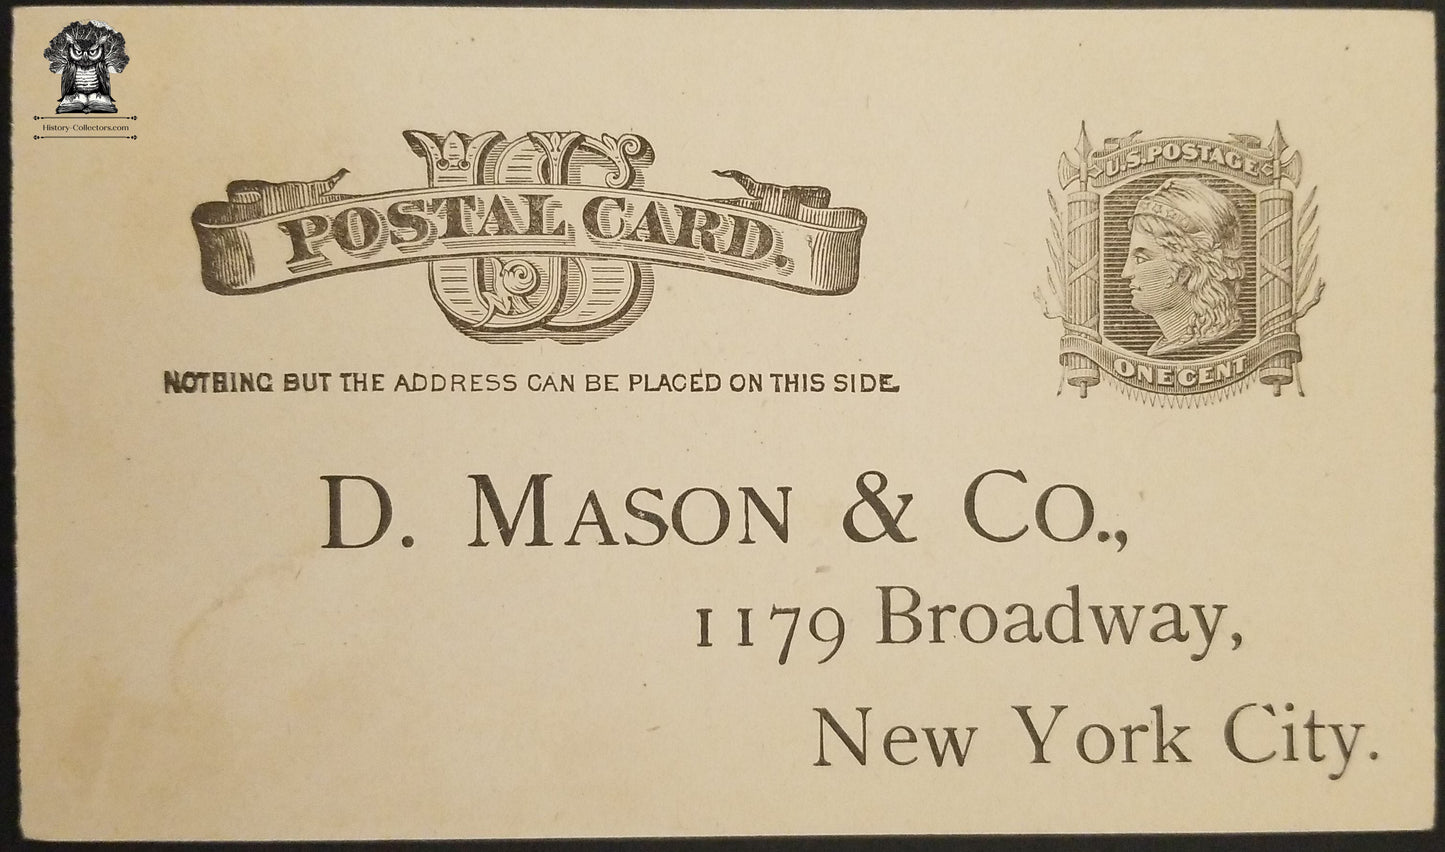 1885 D Mason & Co Advertising Perfection Lace Cabinets Order Form Postcard - 1179 Broadway New York City - One Cent Liberty Postal Card - Scott UX7